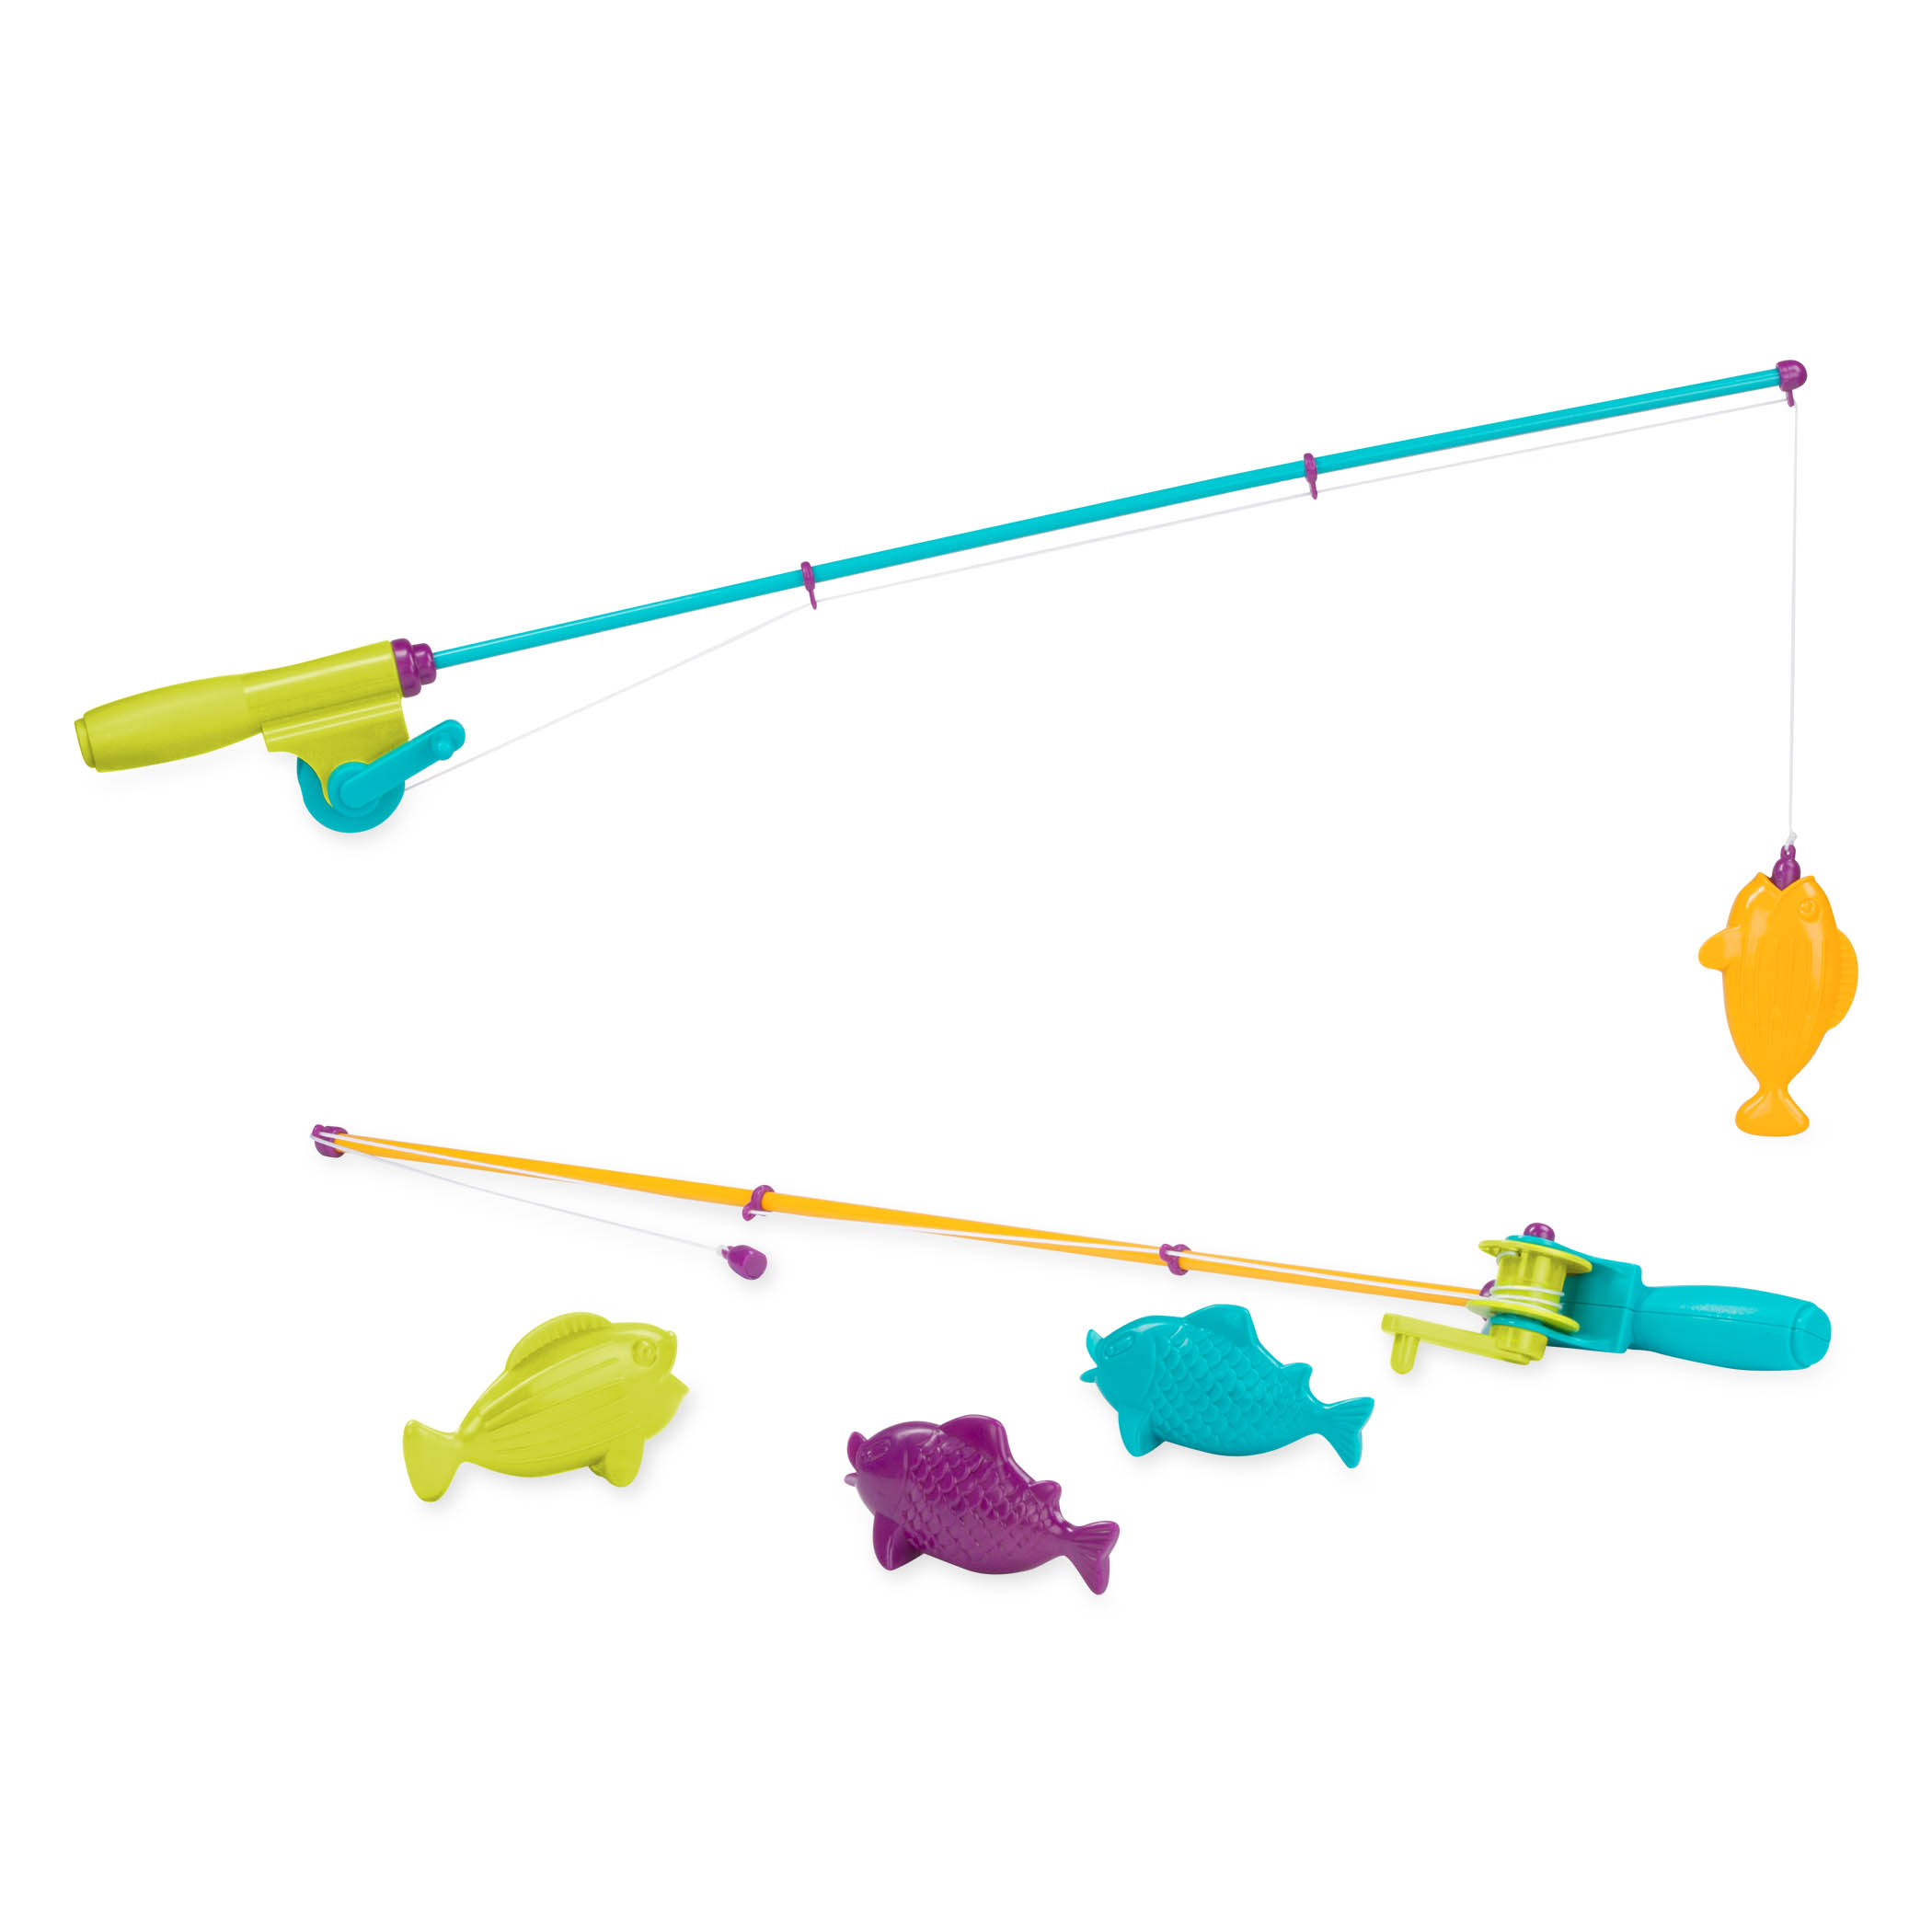 Fishing Rod Play Set Kids Bath Toy Fun Learning Indoor Outdoor Game Gift  Pack